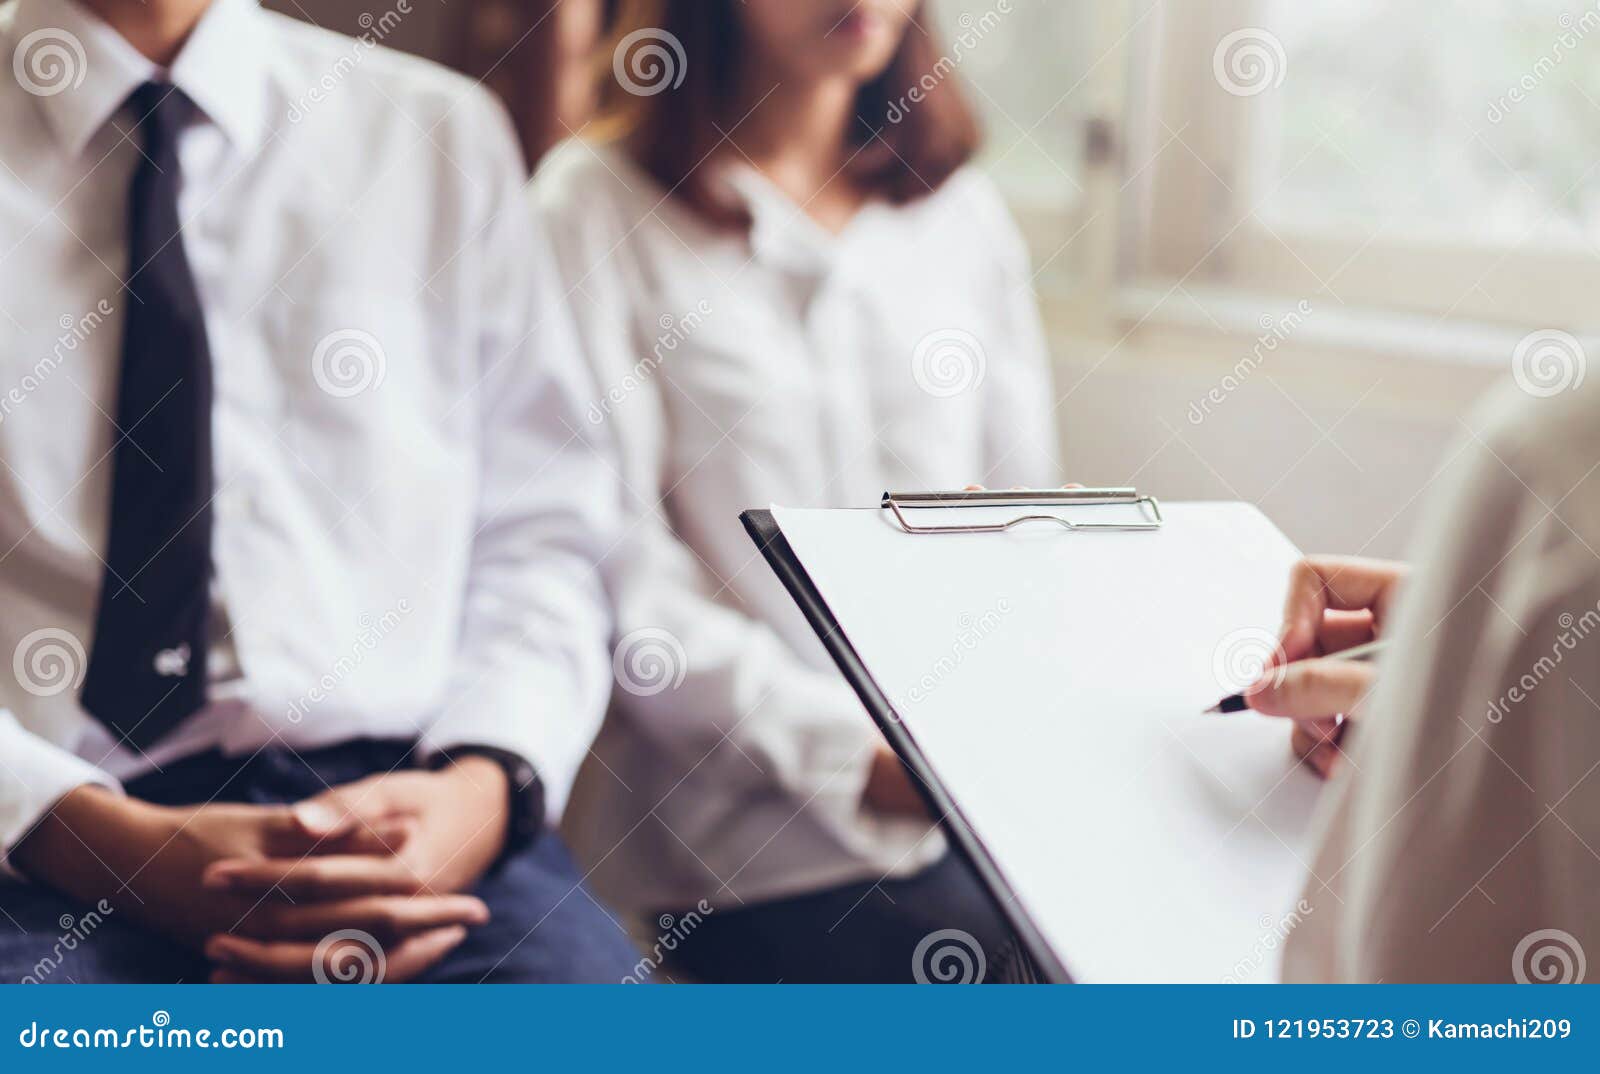 the doctor provides consultation with the patient and records the treatment history thoroughly.